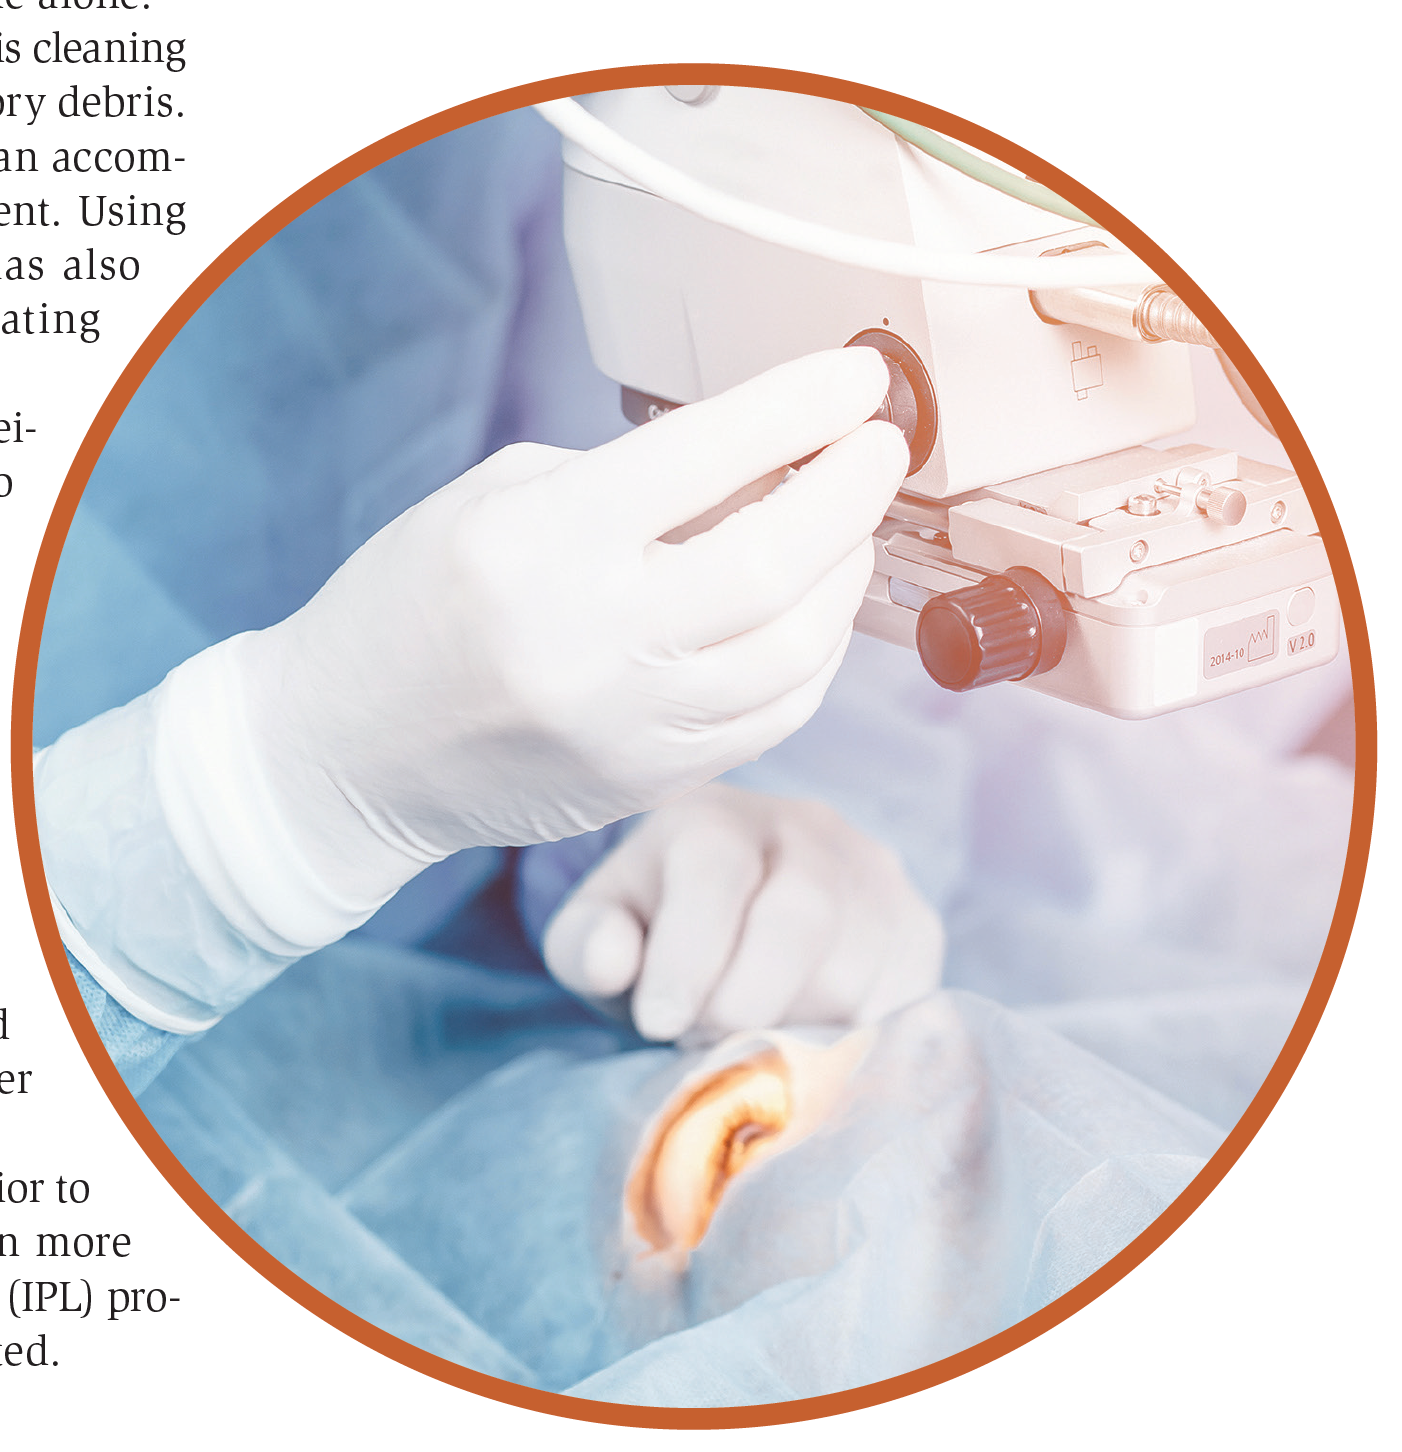 Why ODs should prepare patients for surgery years before they need it